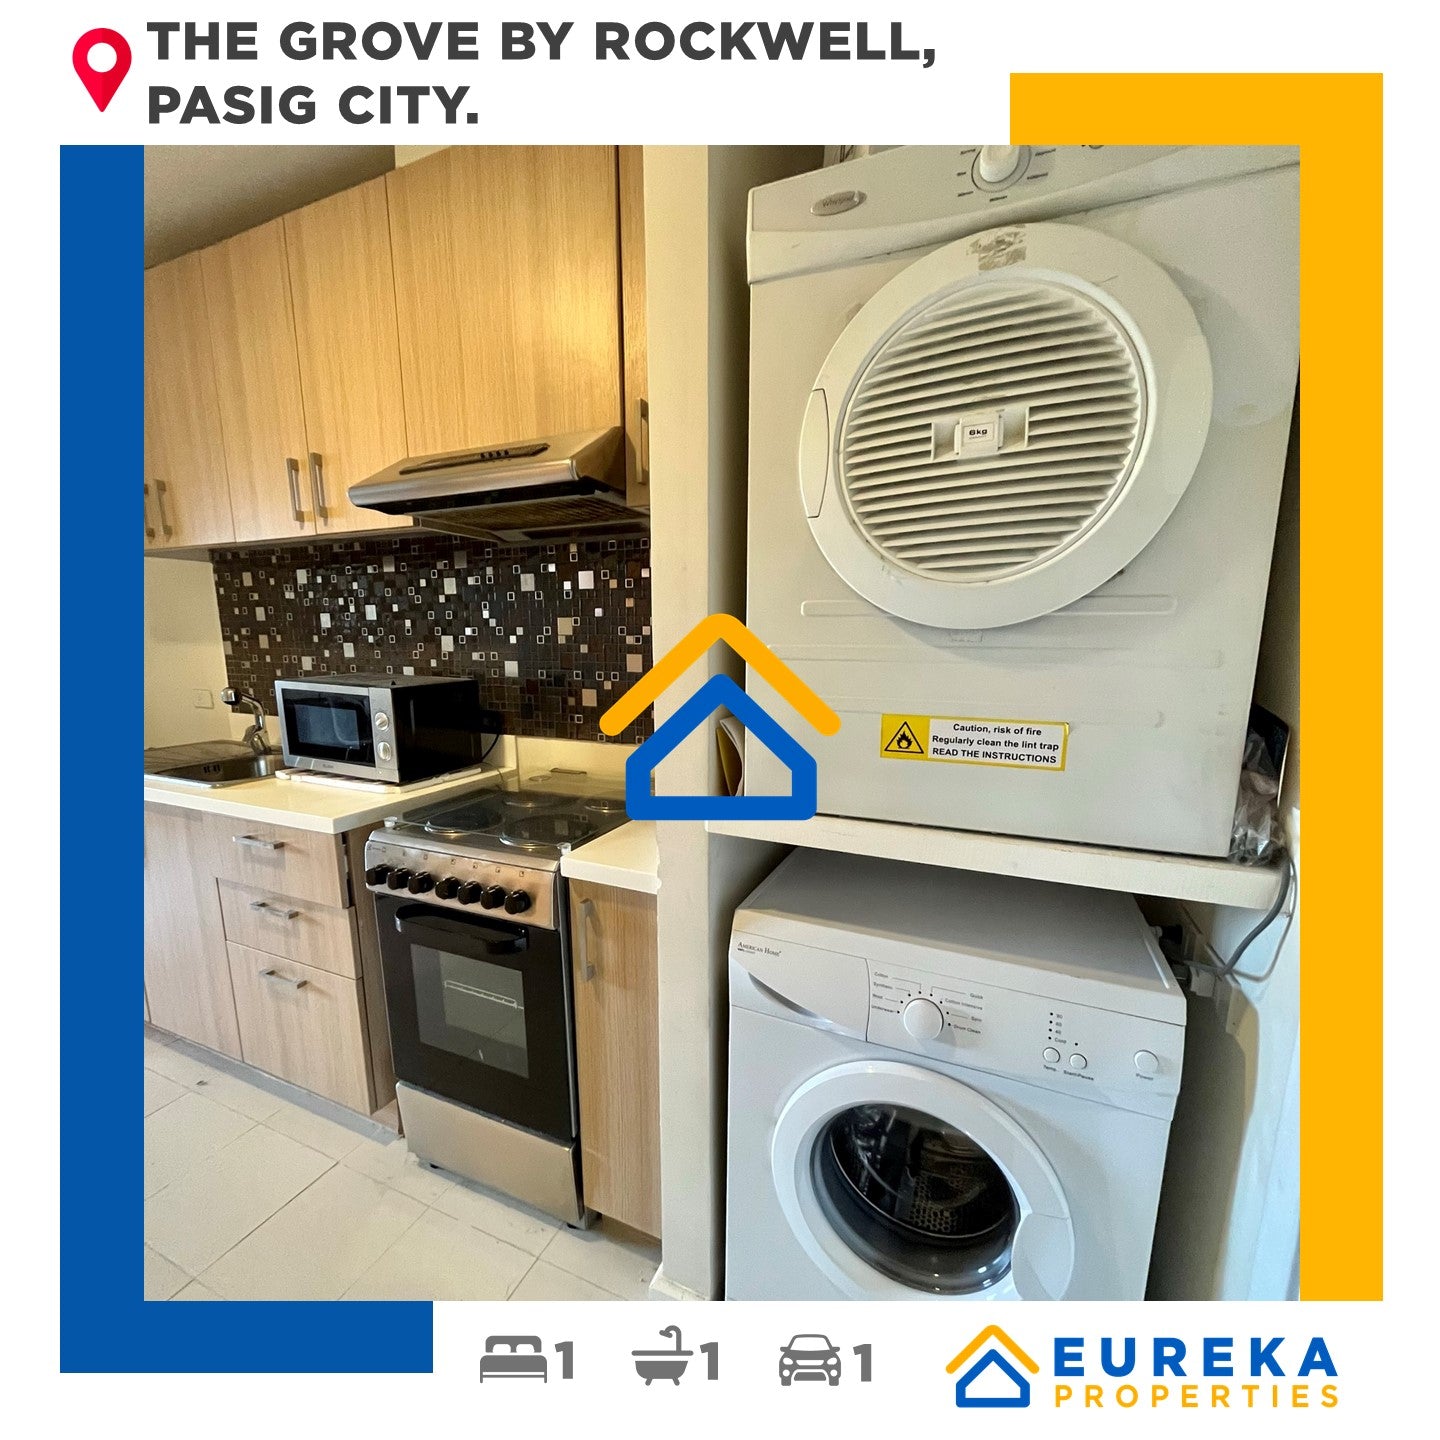 Furnished 43 sqm 1BR with parking at the Grove by Rockwell, Pasig City.